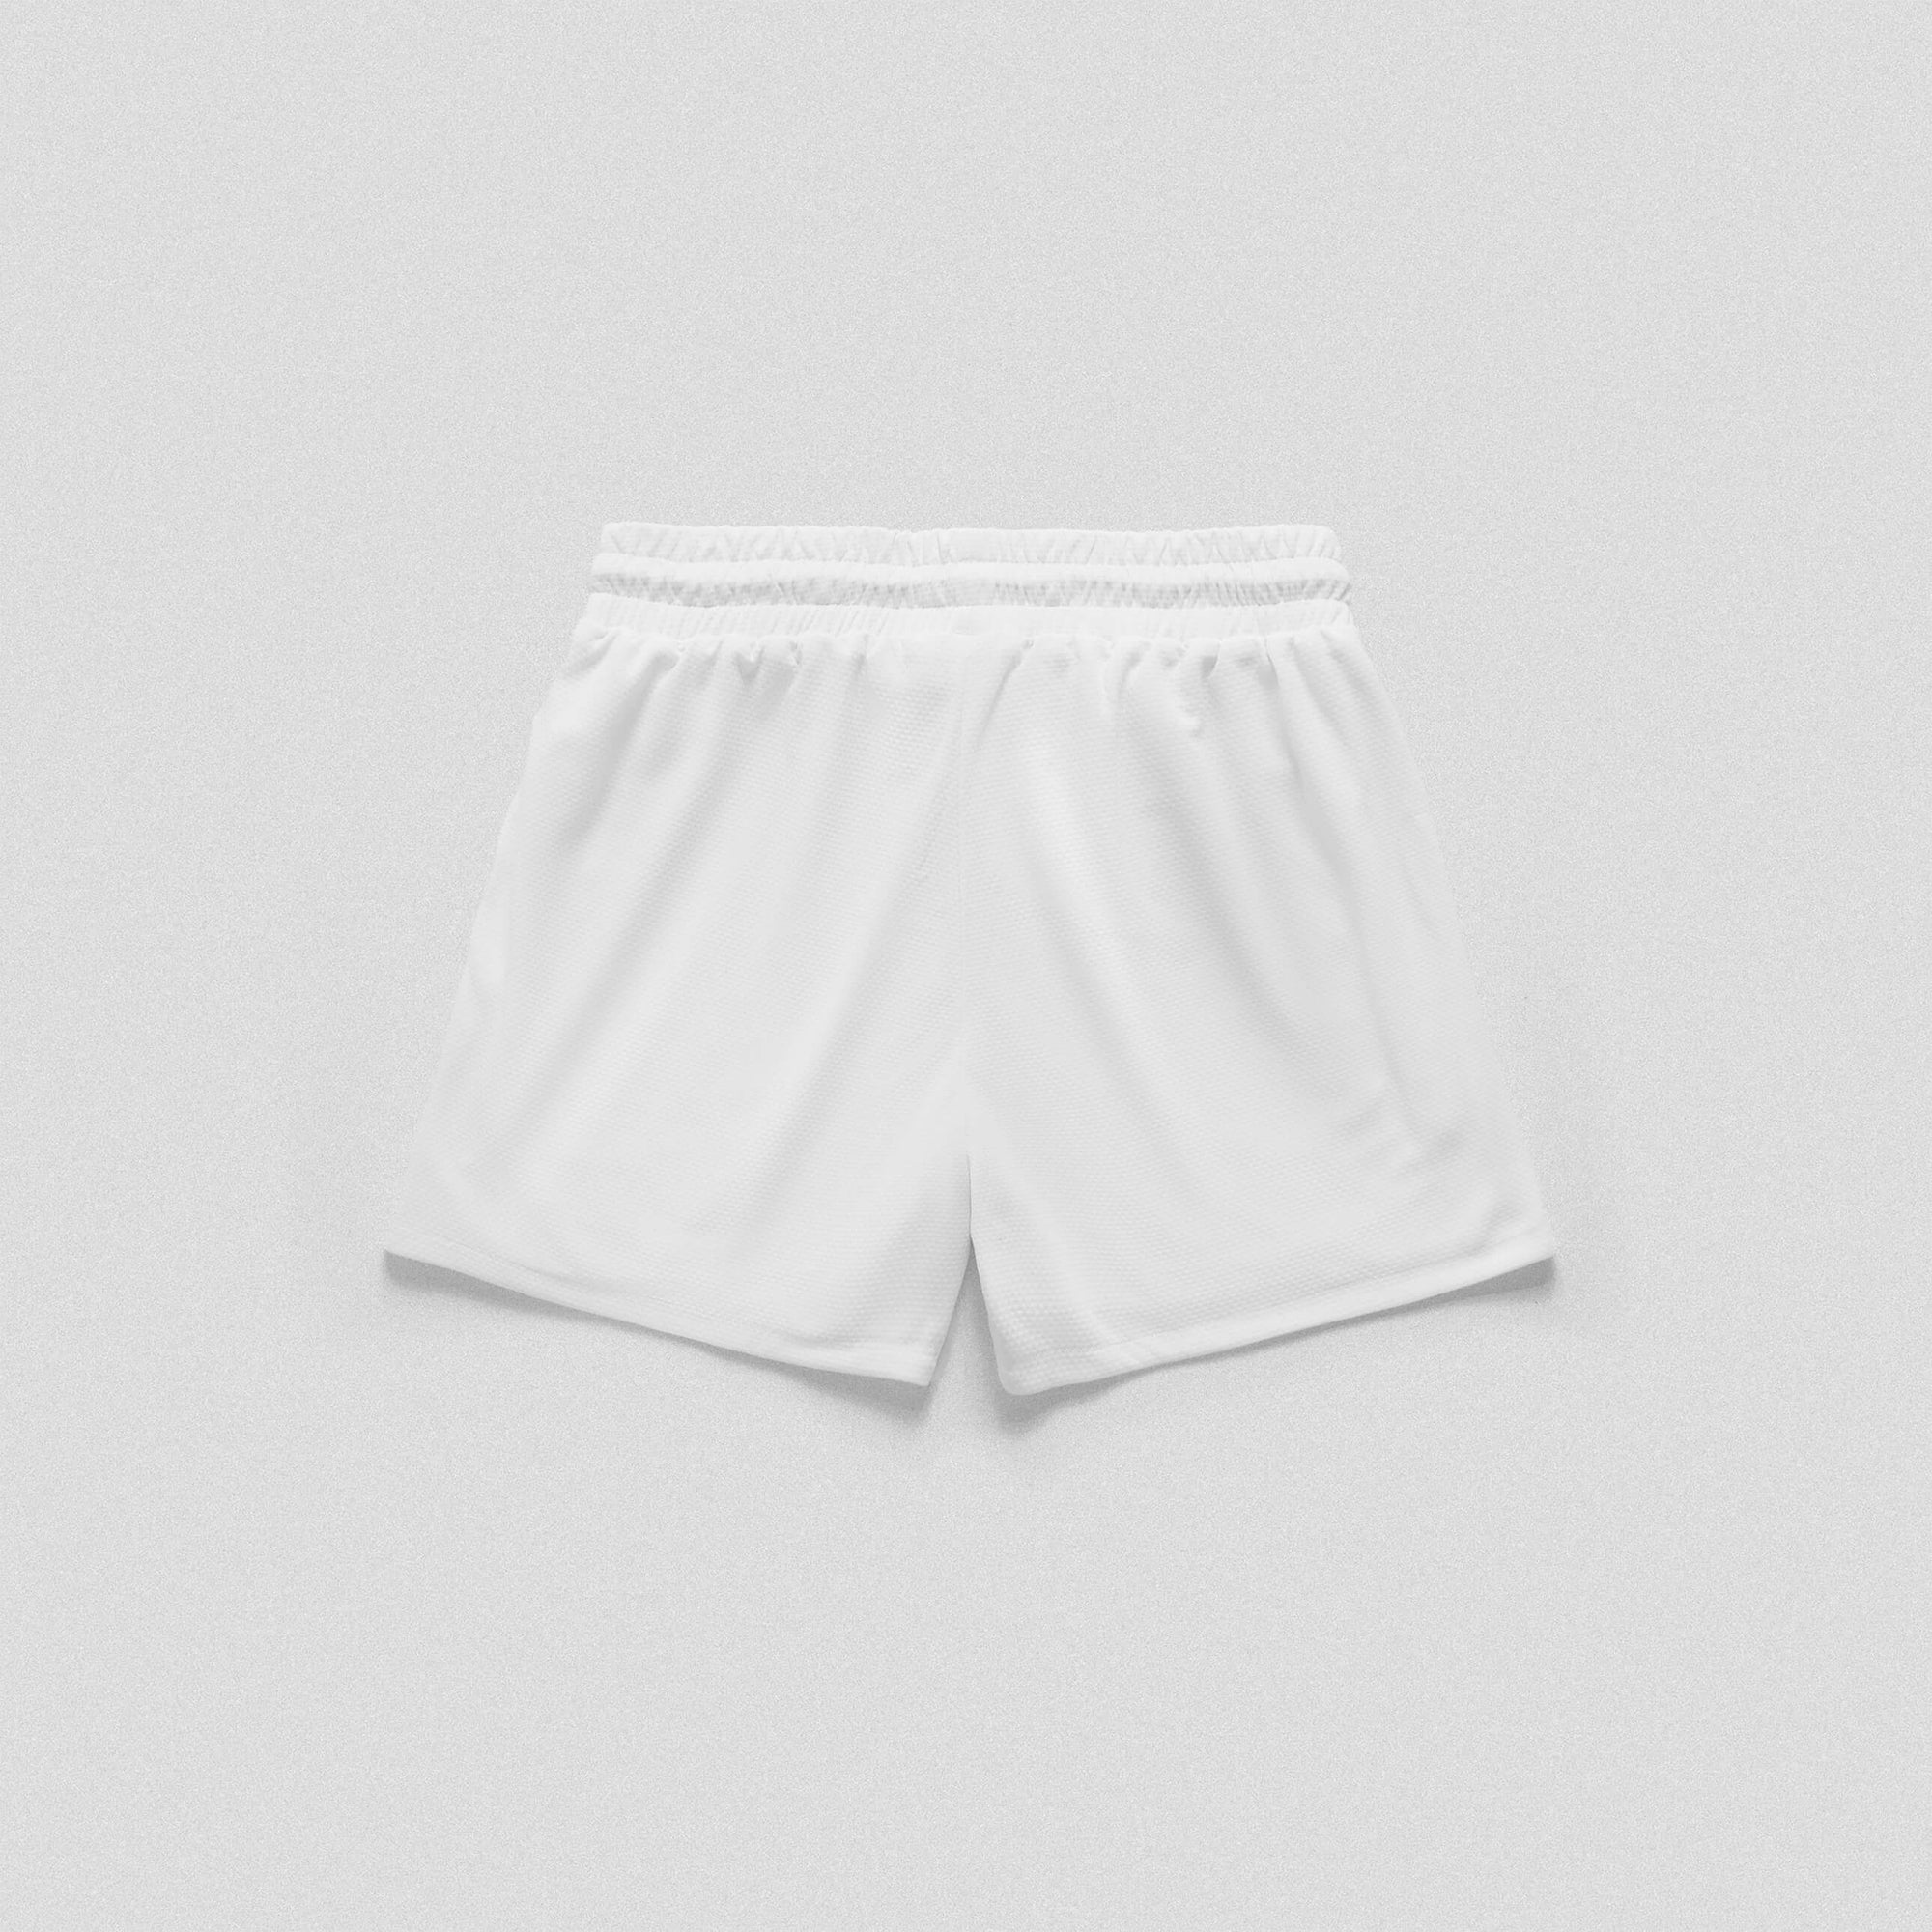 mesh short white with red string back